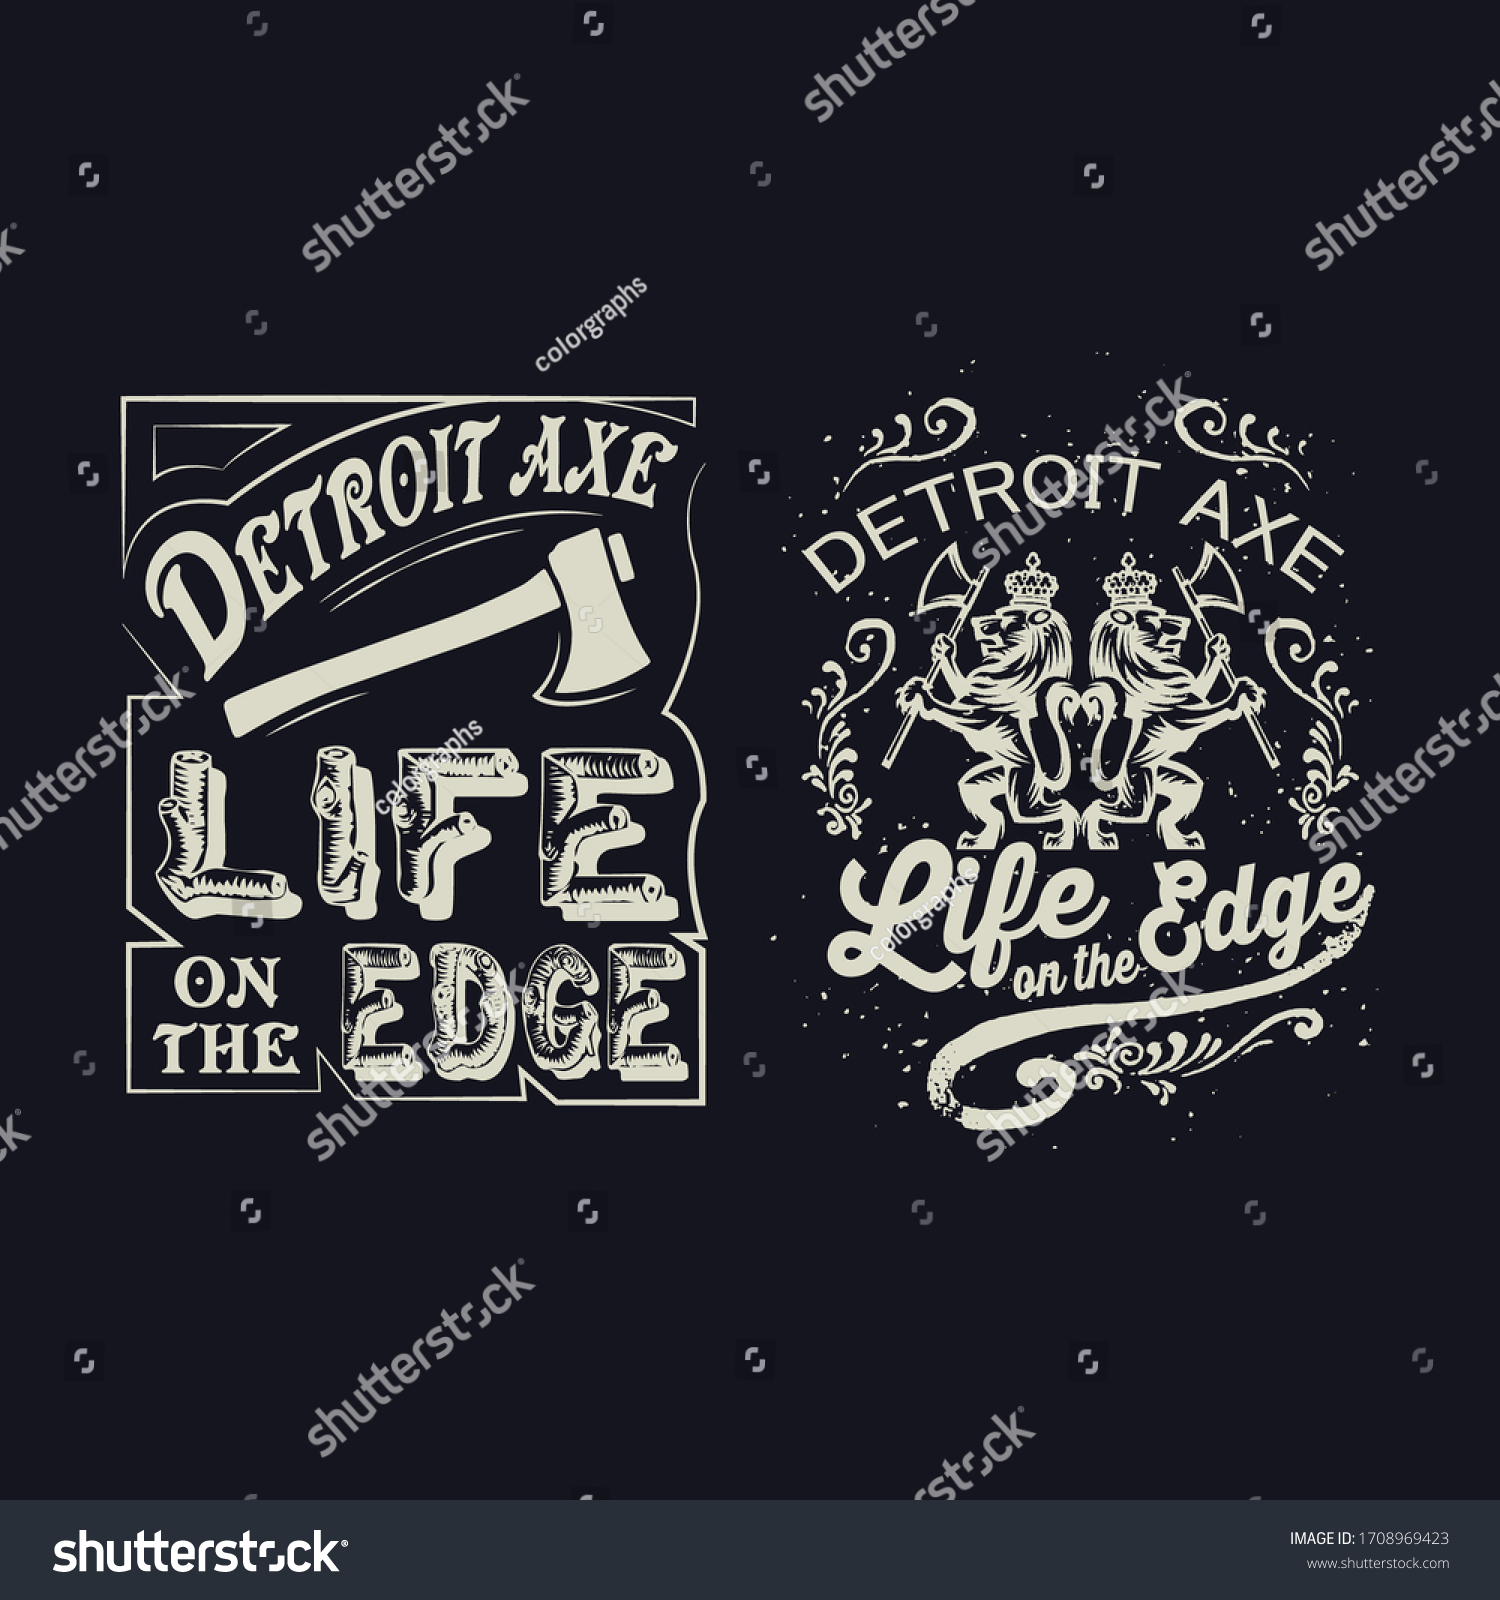 SVG of detroit axe t shirts life on the edge 344 west nine mile rd stock vector print design set background template  svg